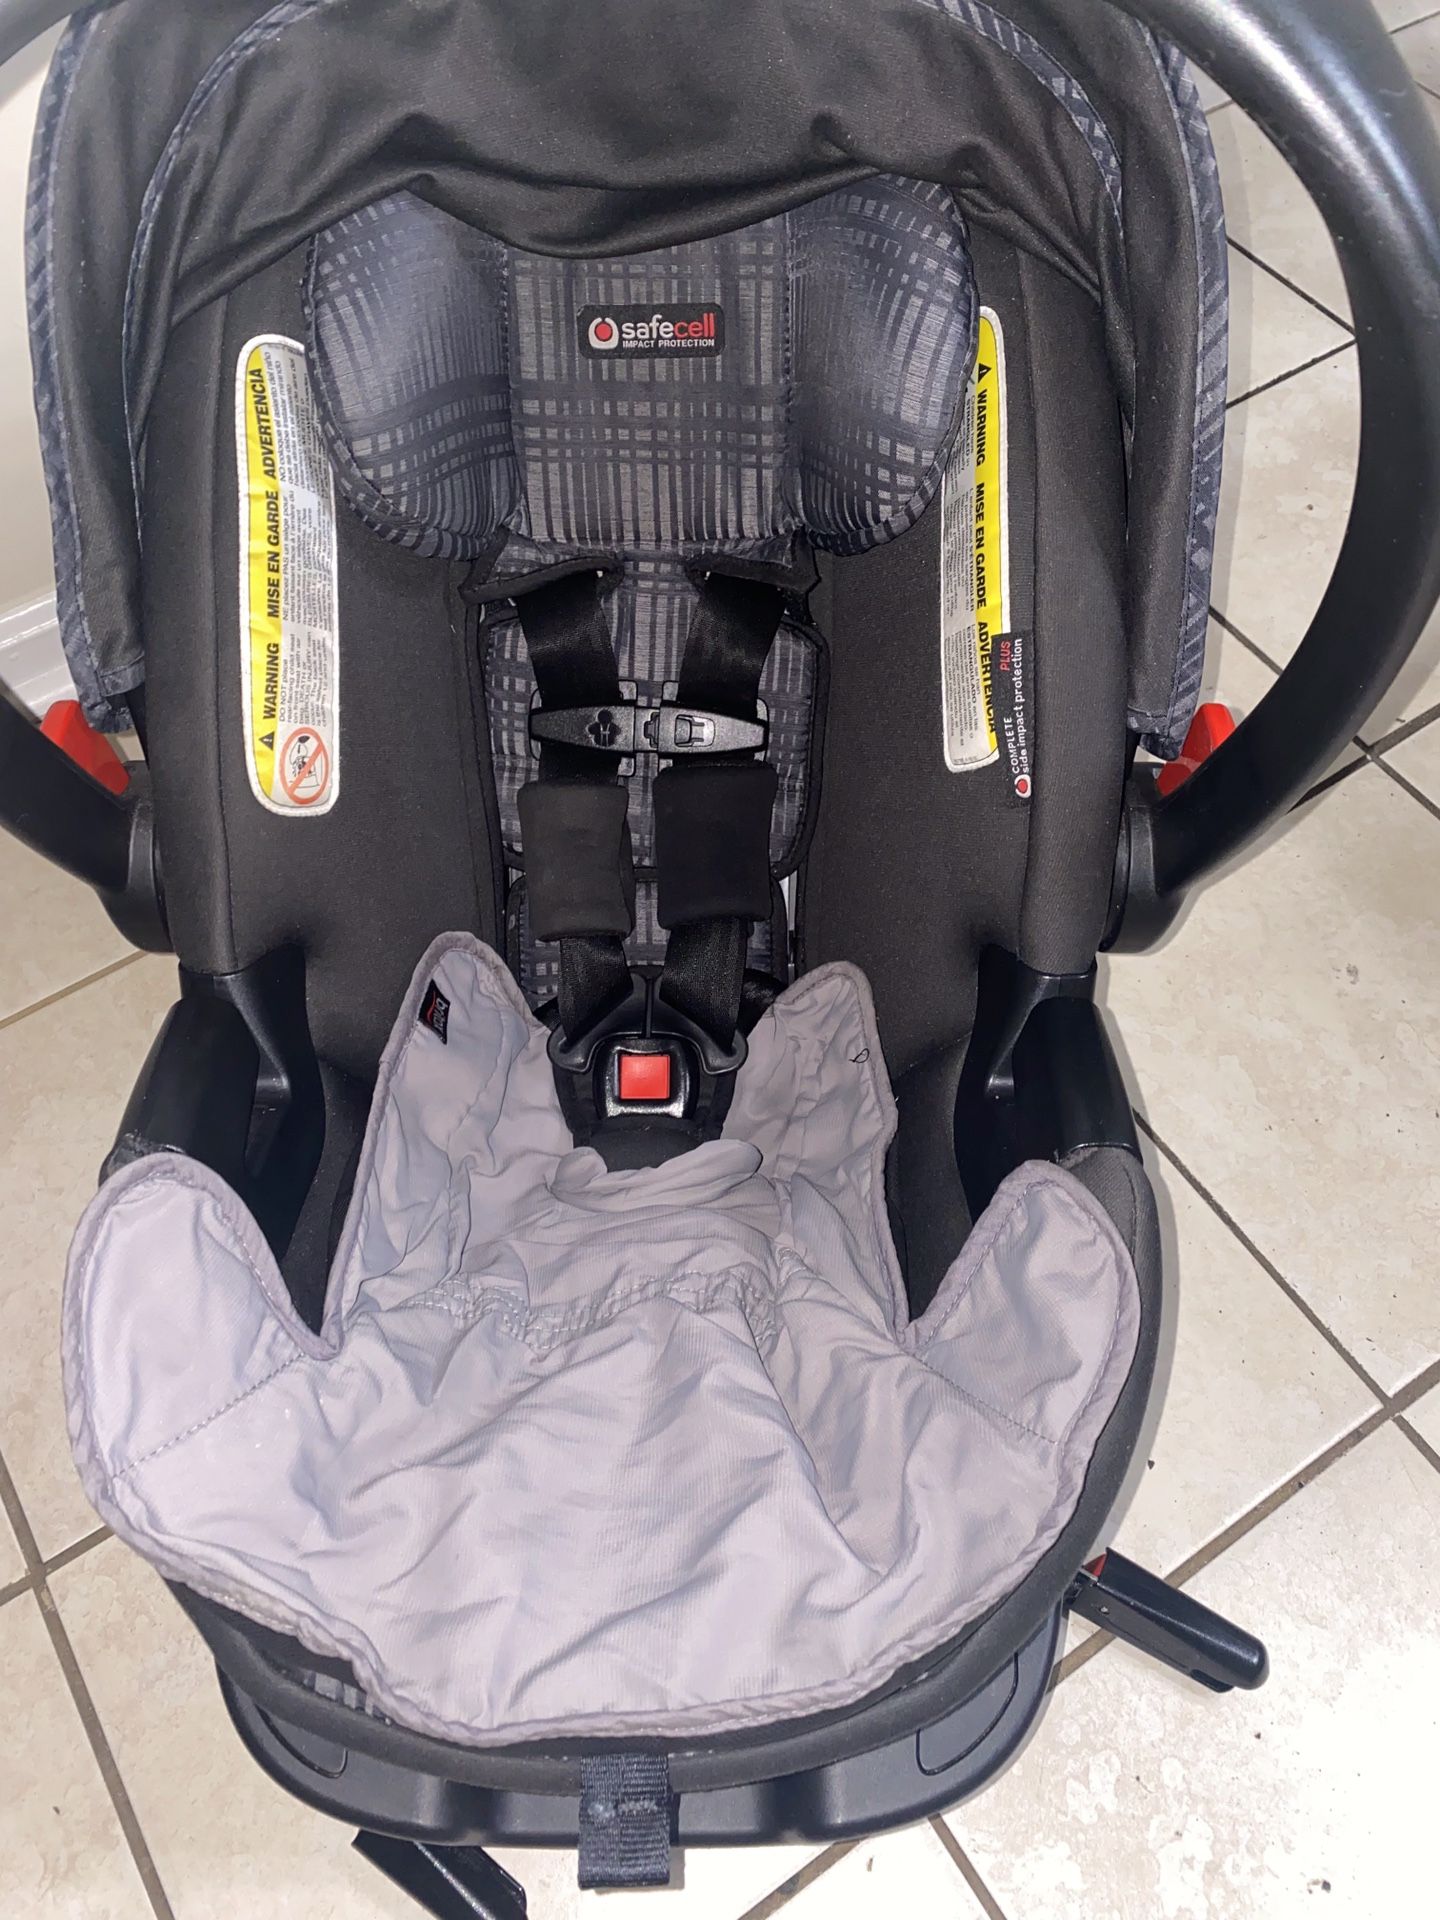 New Gen2 Britax Car seat $40 Don’t Miss Out 